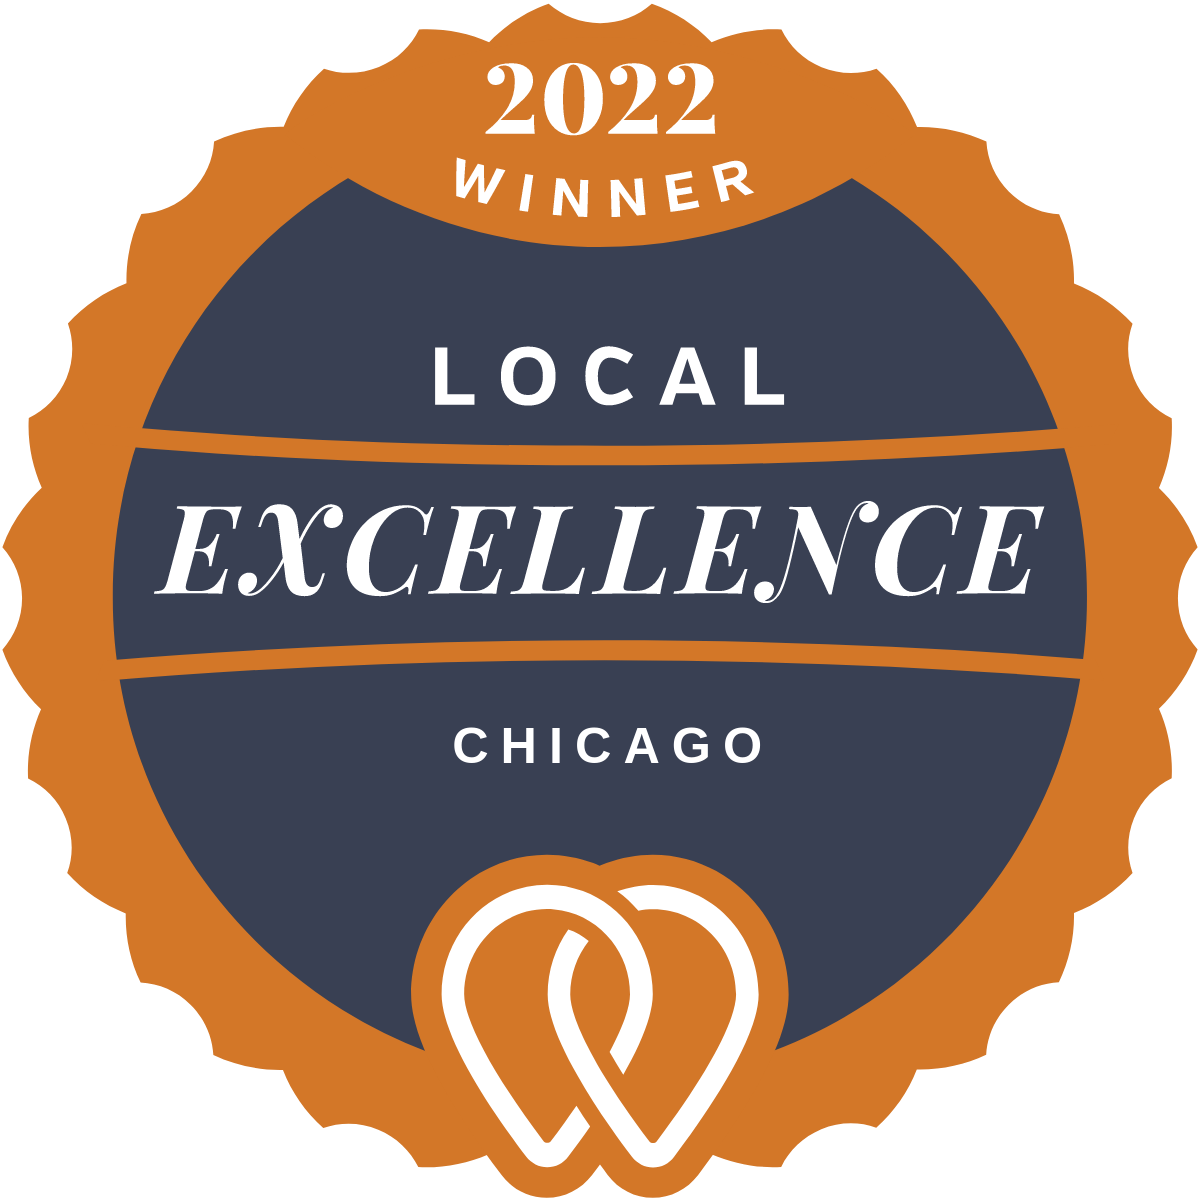 2022 UpCity Chicago local excellence award